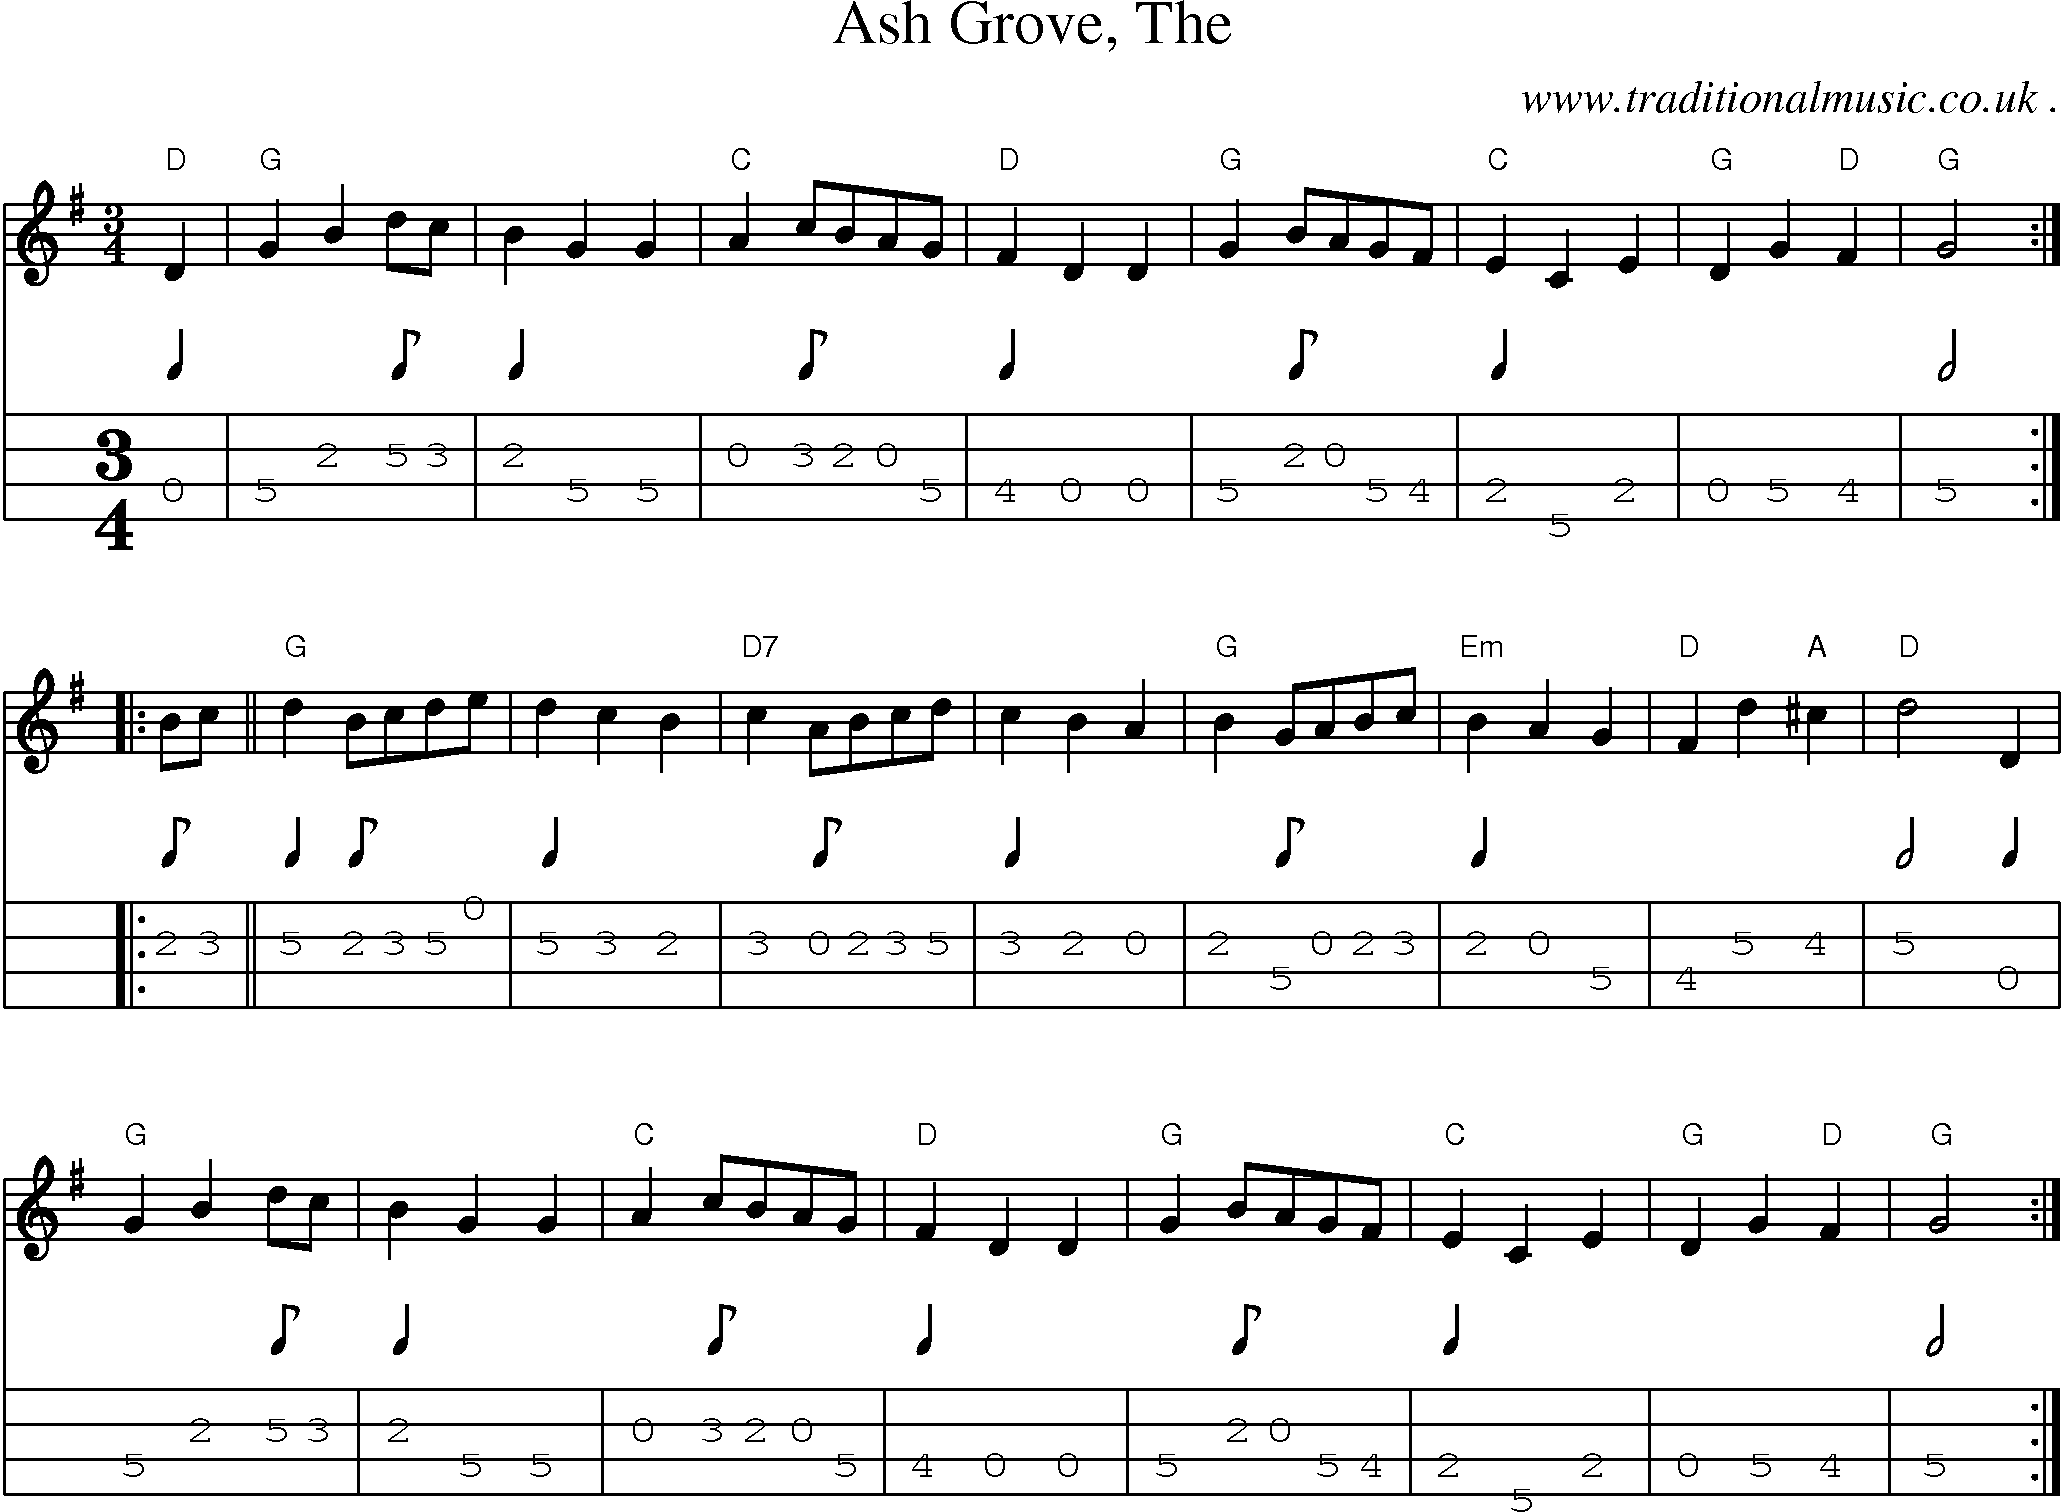 Music Score and Guitar Tabs for Ash Grove The